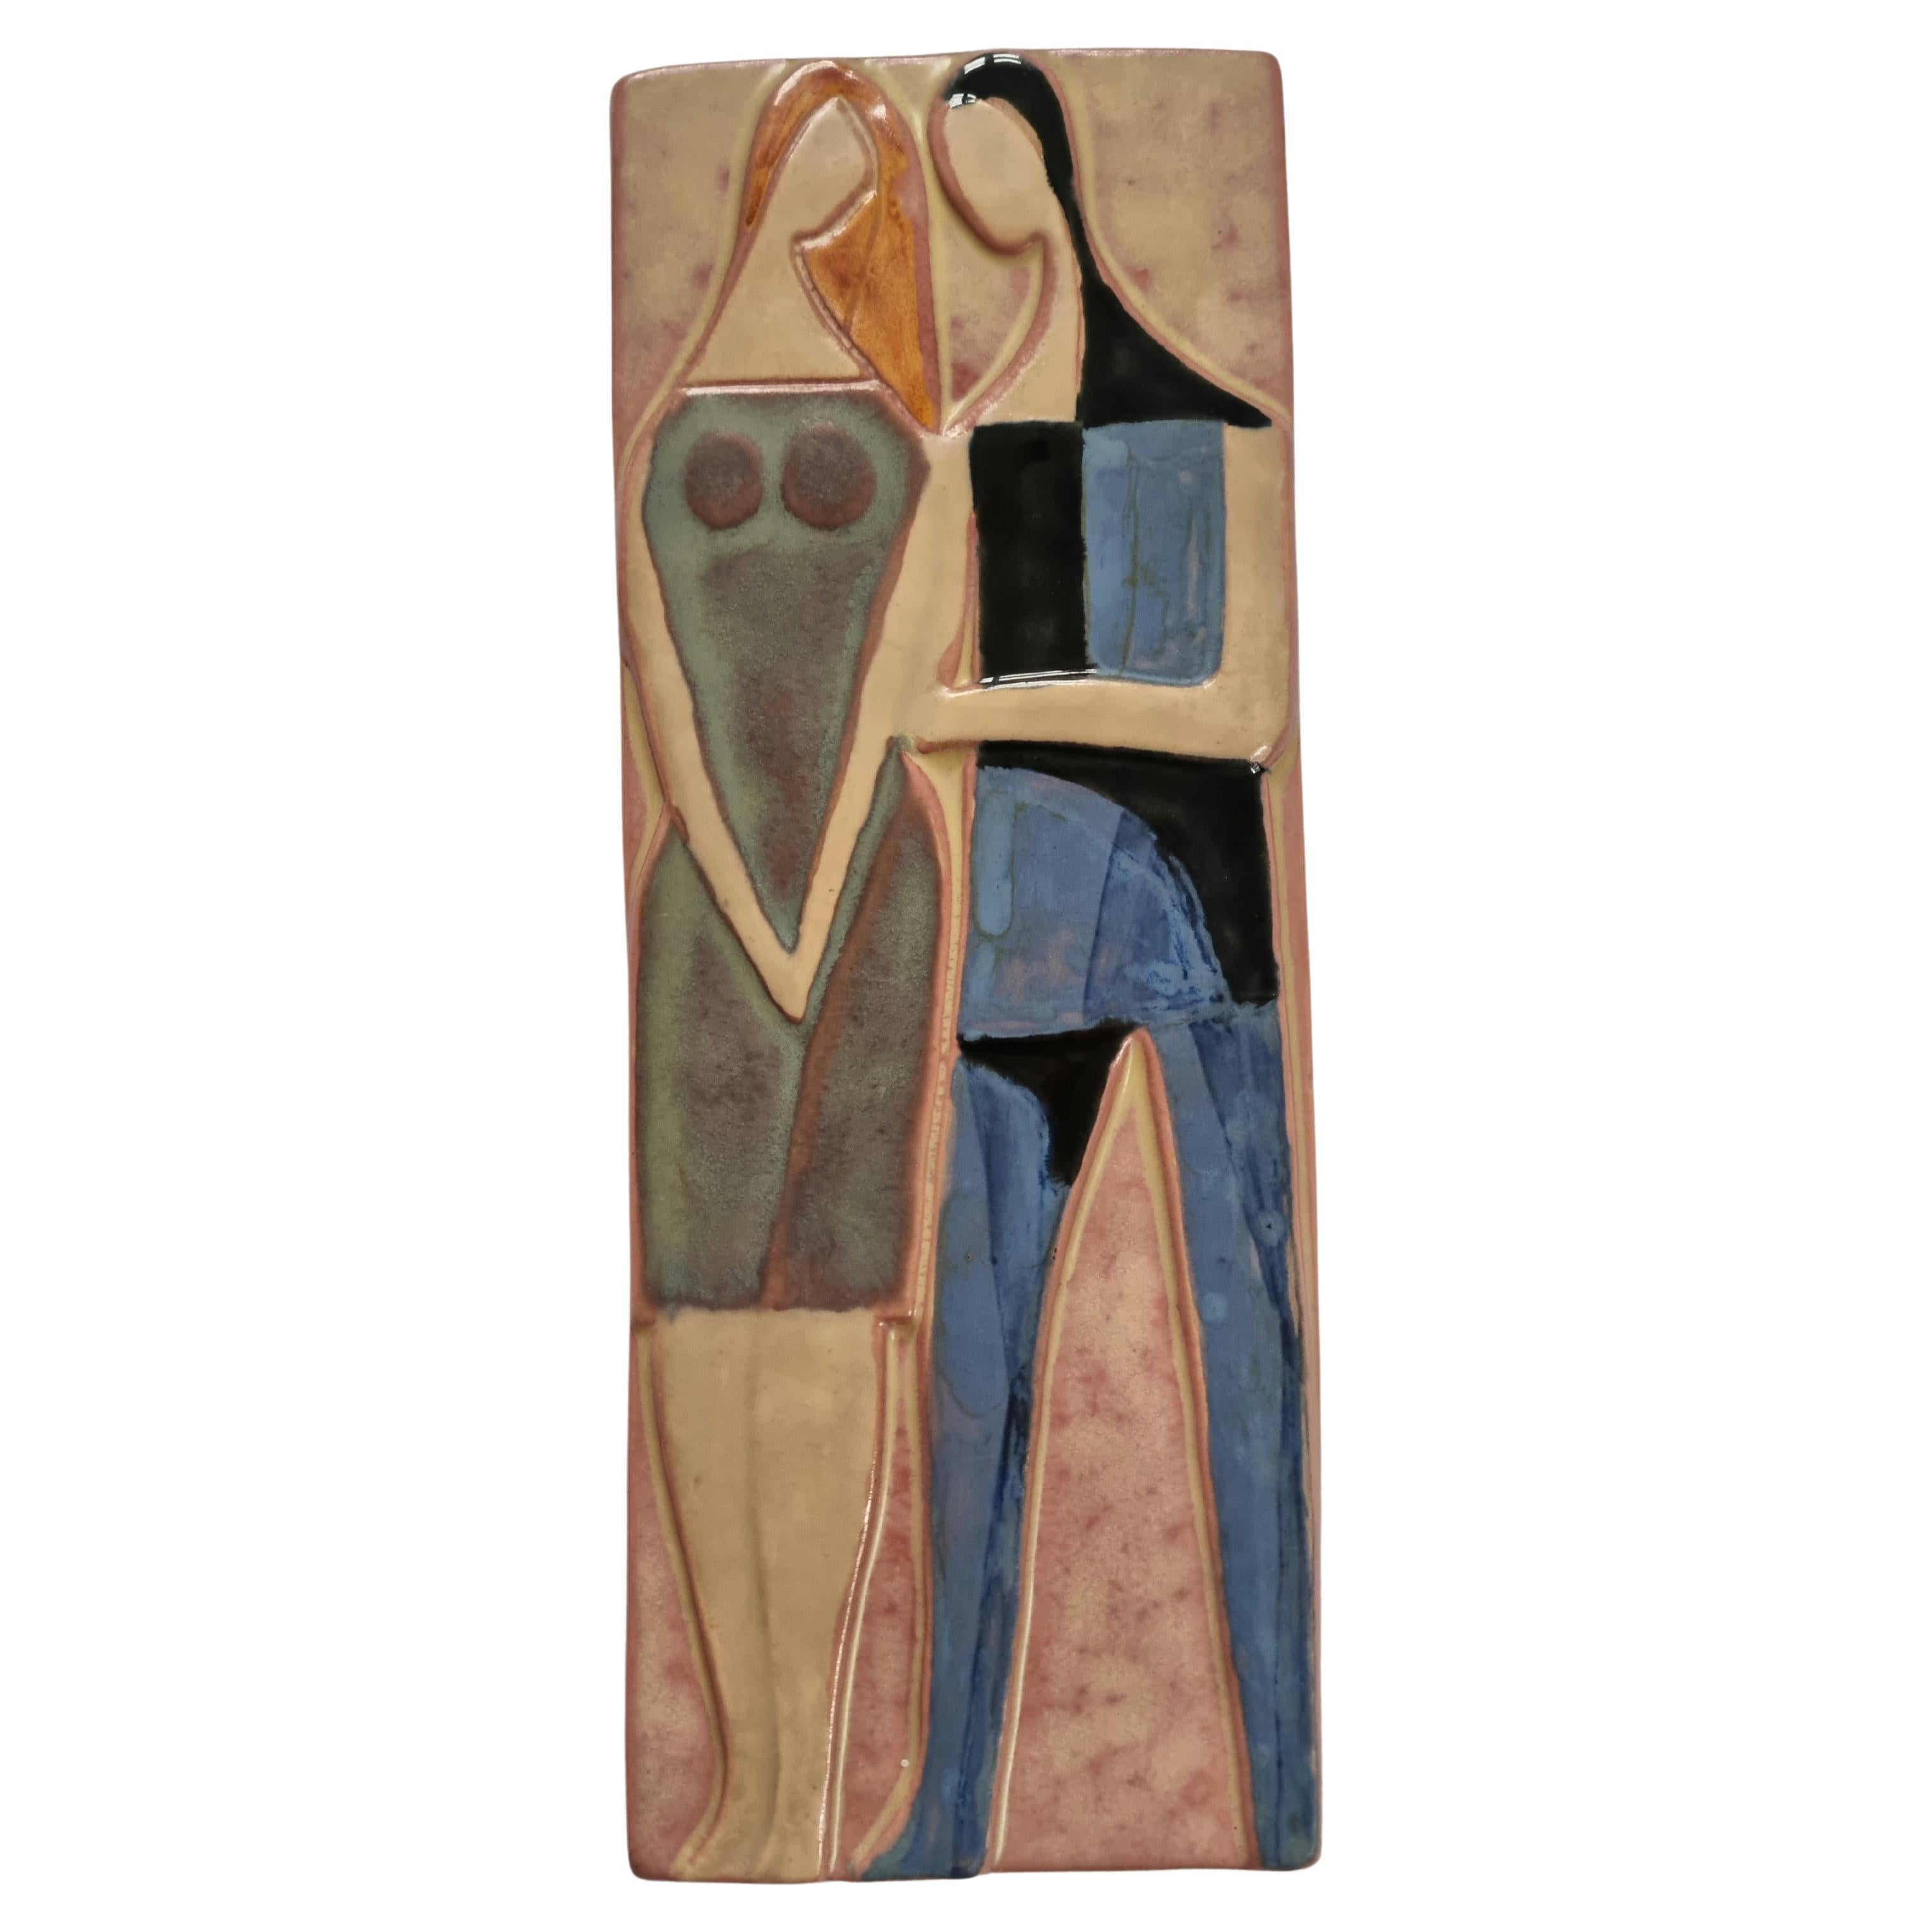 Rare Midcentury Ceramic Wall Sculpture Lovers, 1970s For Sale